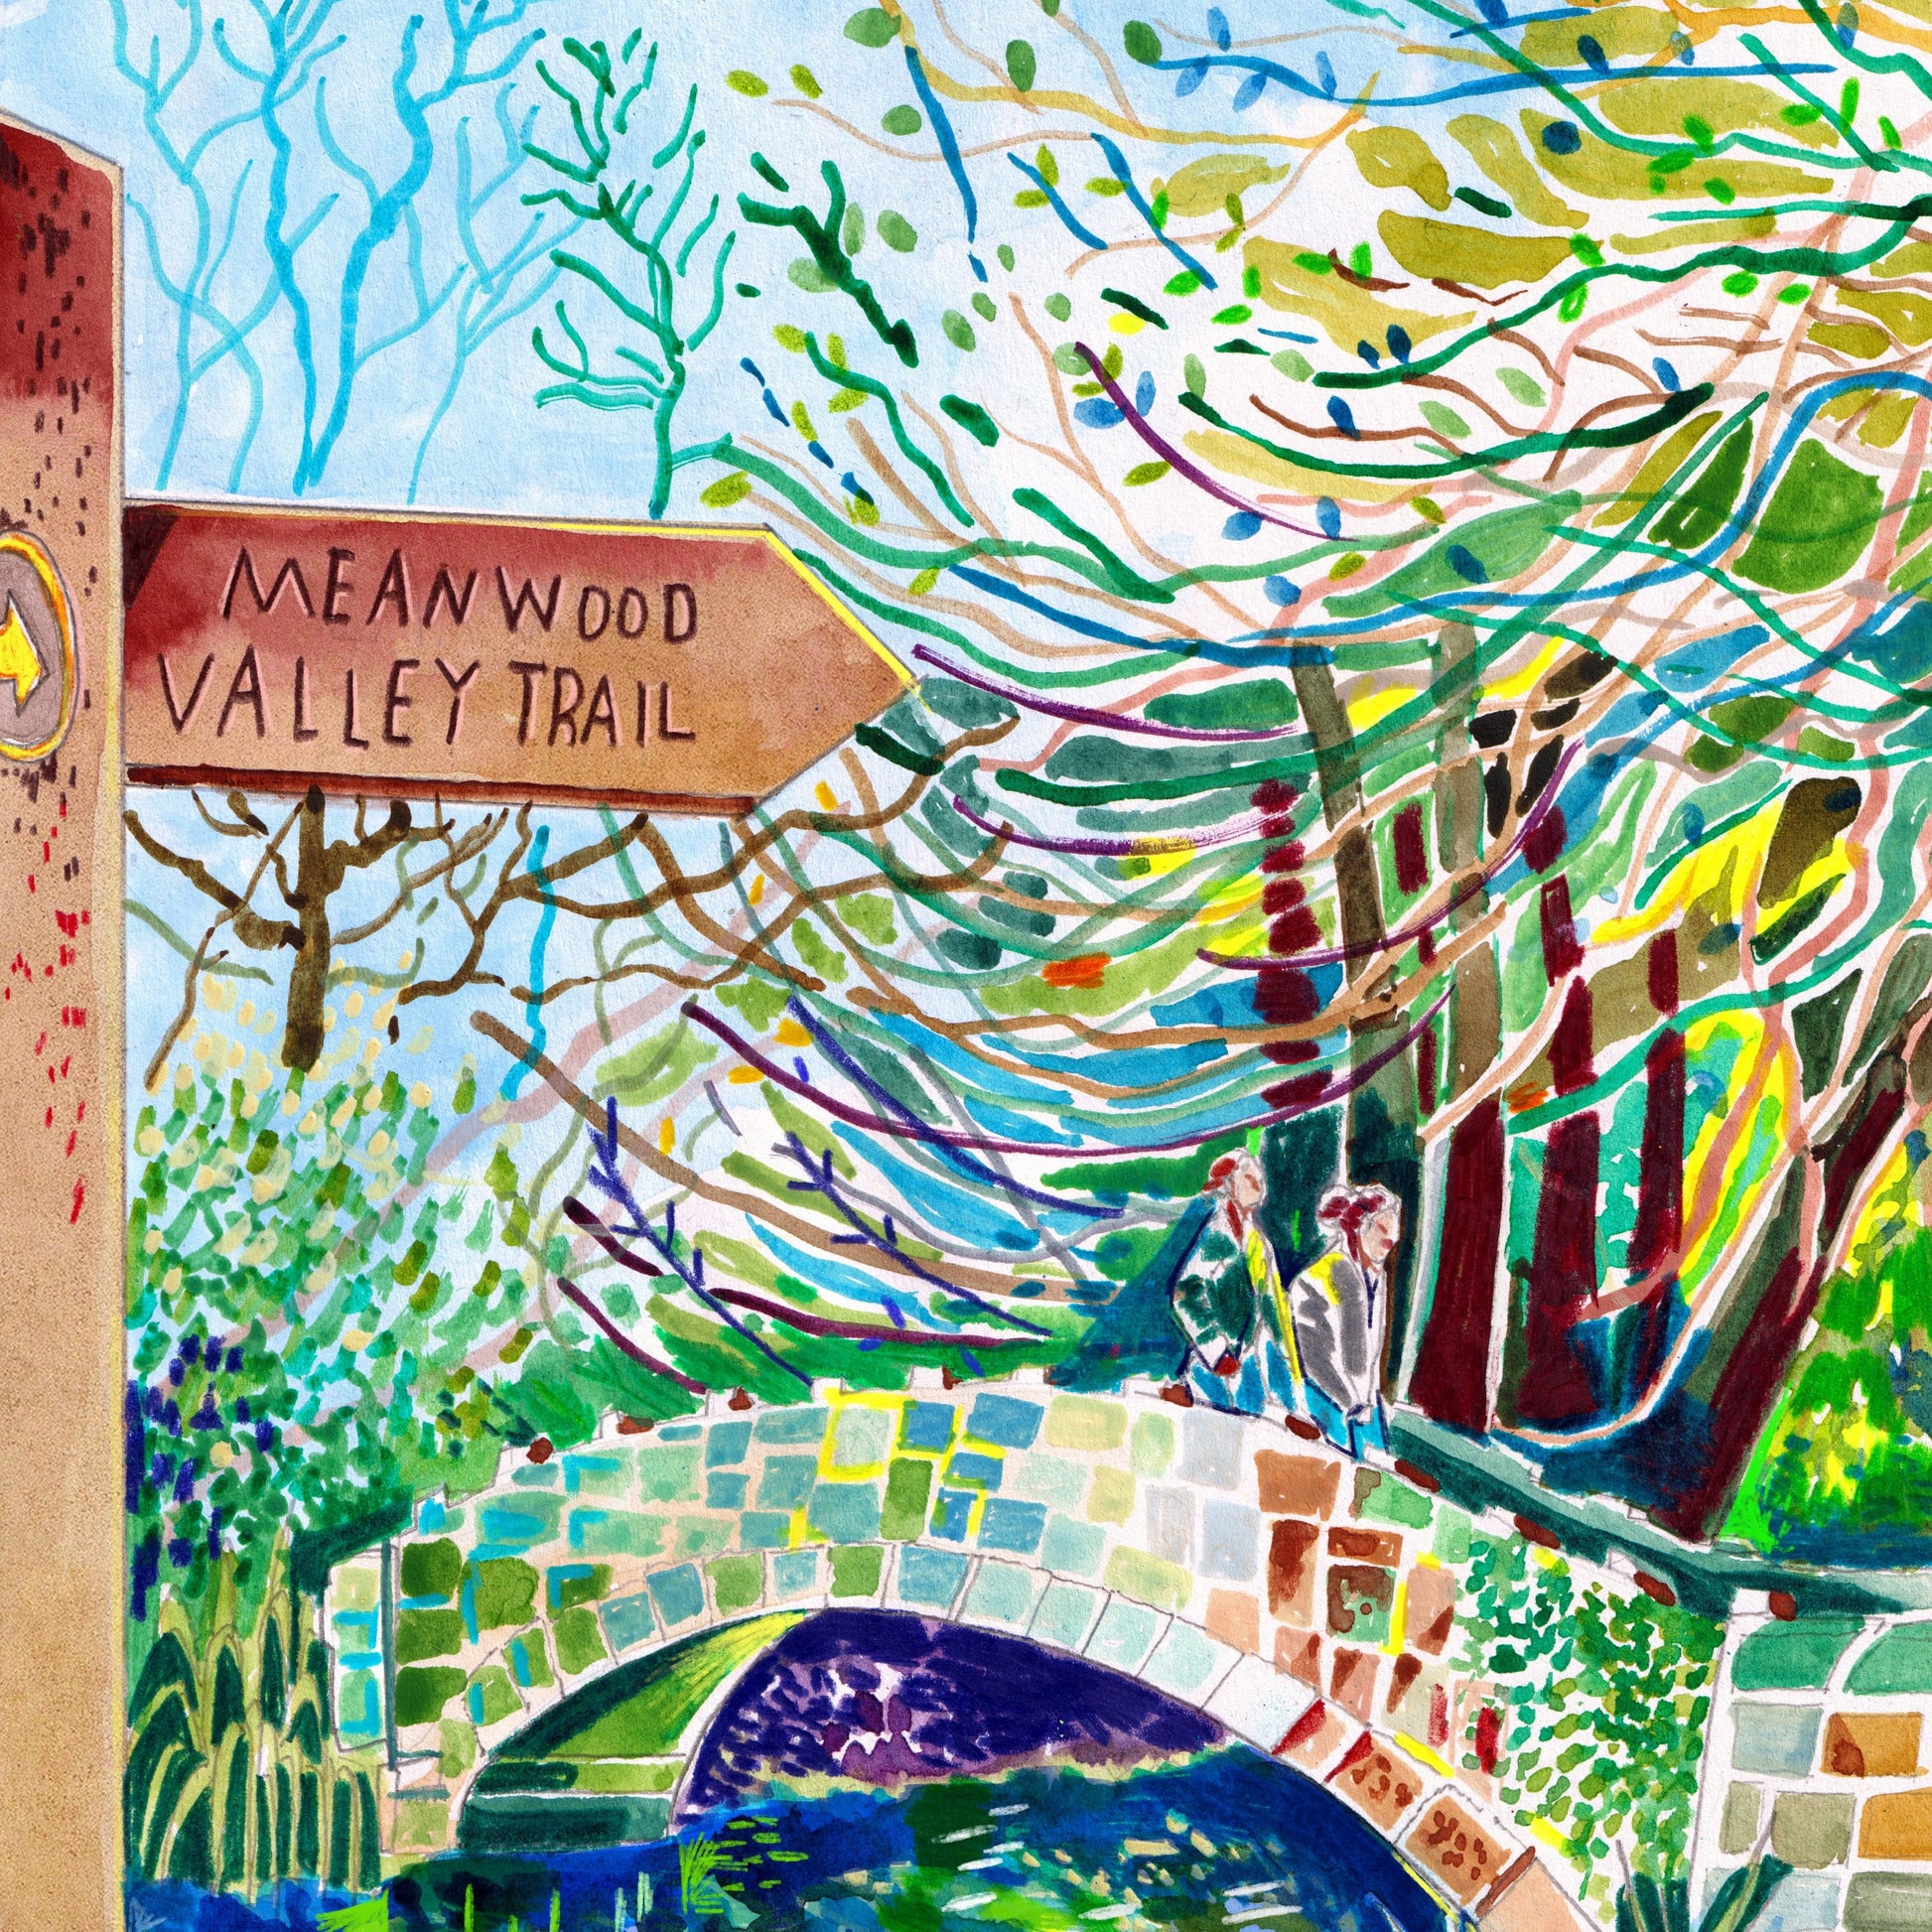 Meanwood valley trail art print